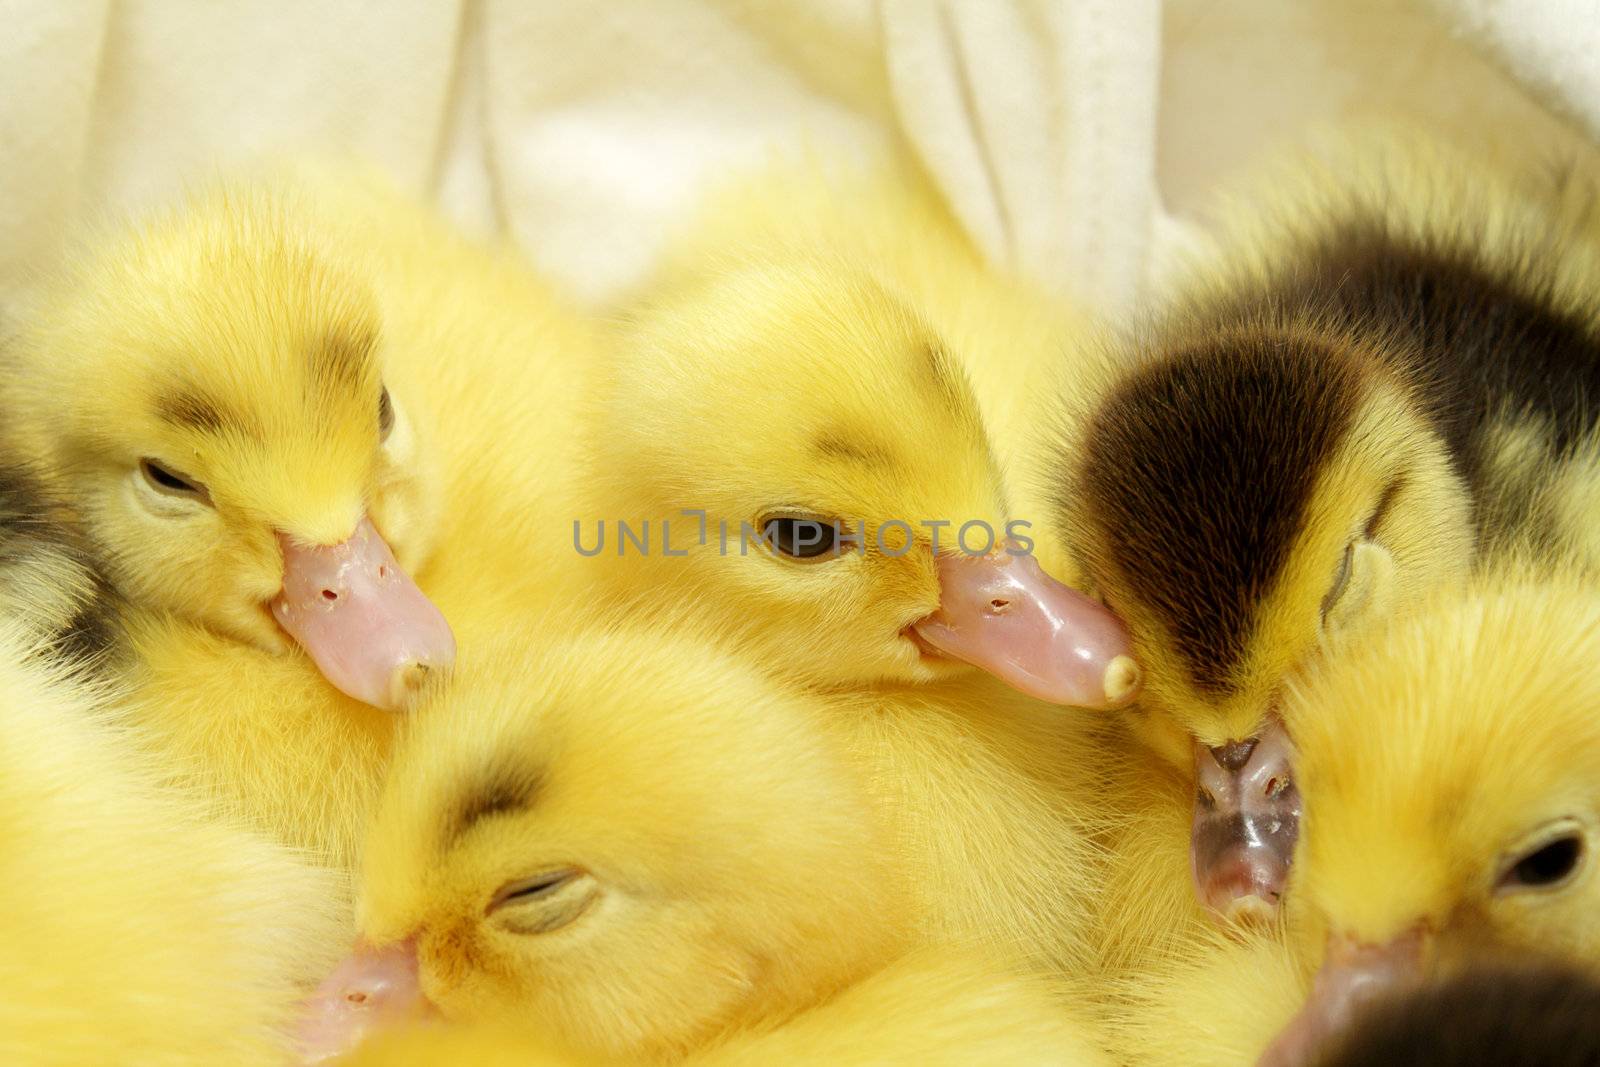 Several yellow and black ducklings sleeping together